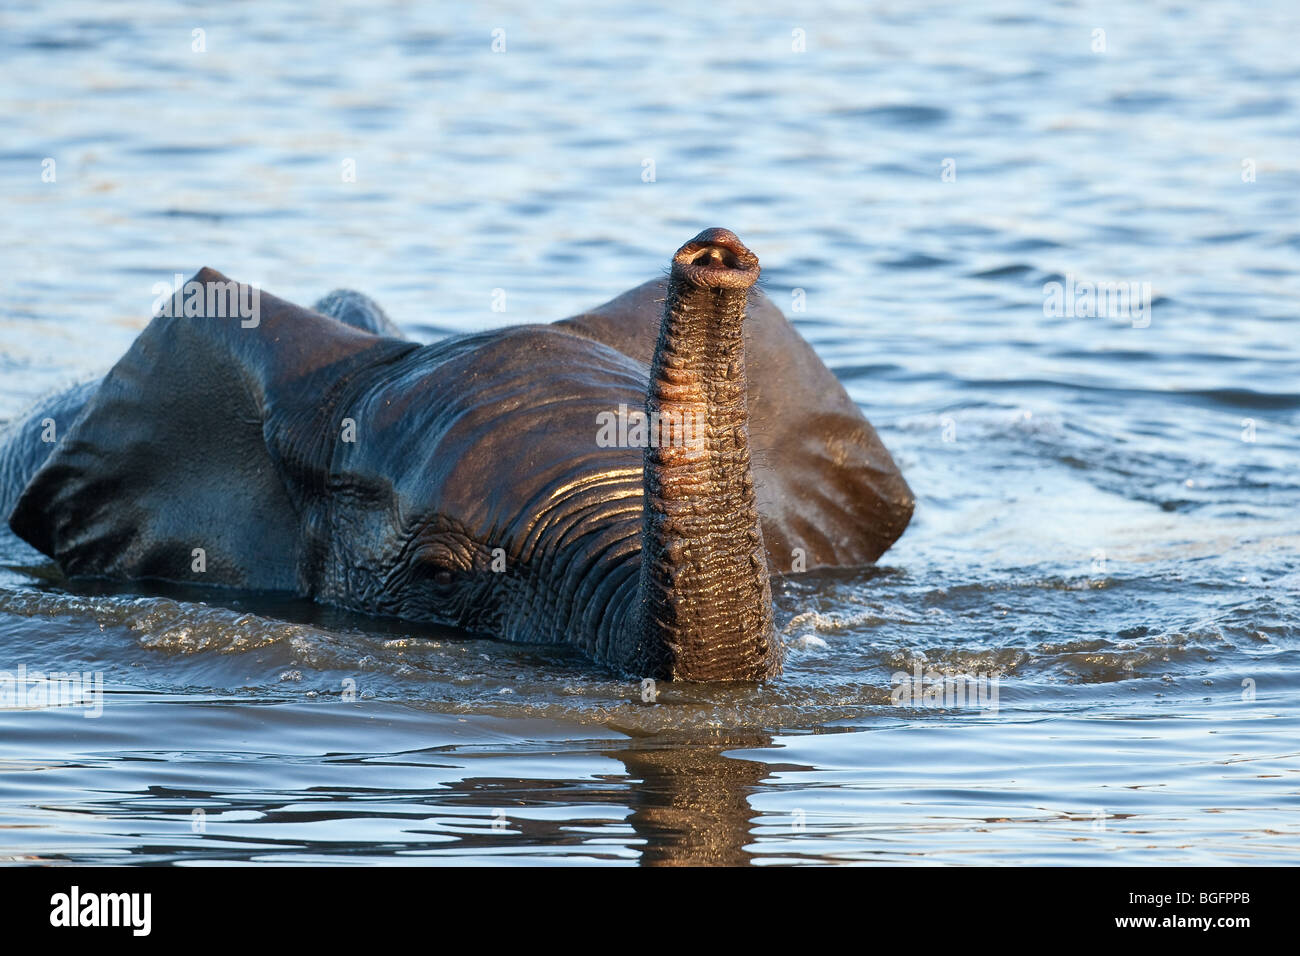 Elephant playing in water with trunk raised Stock Photo